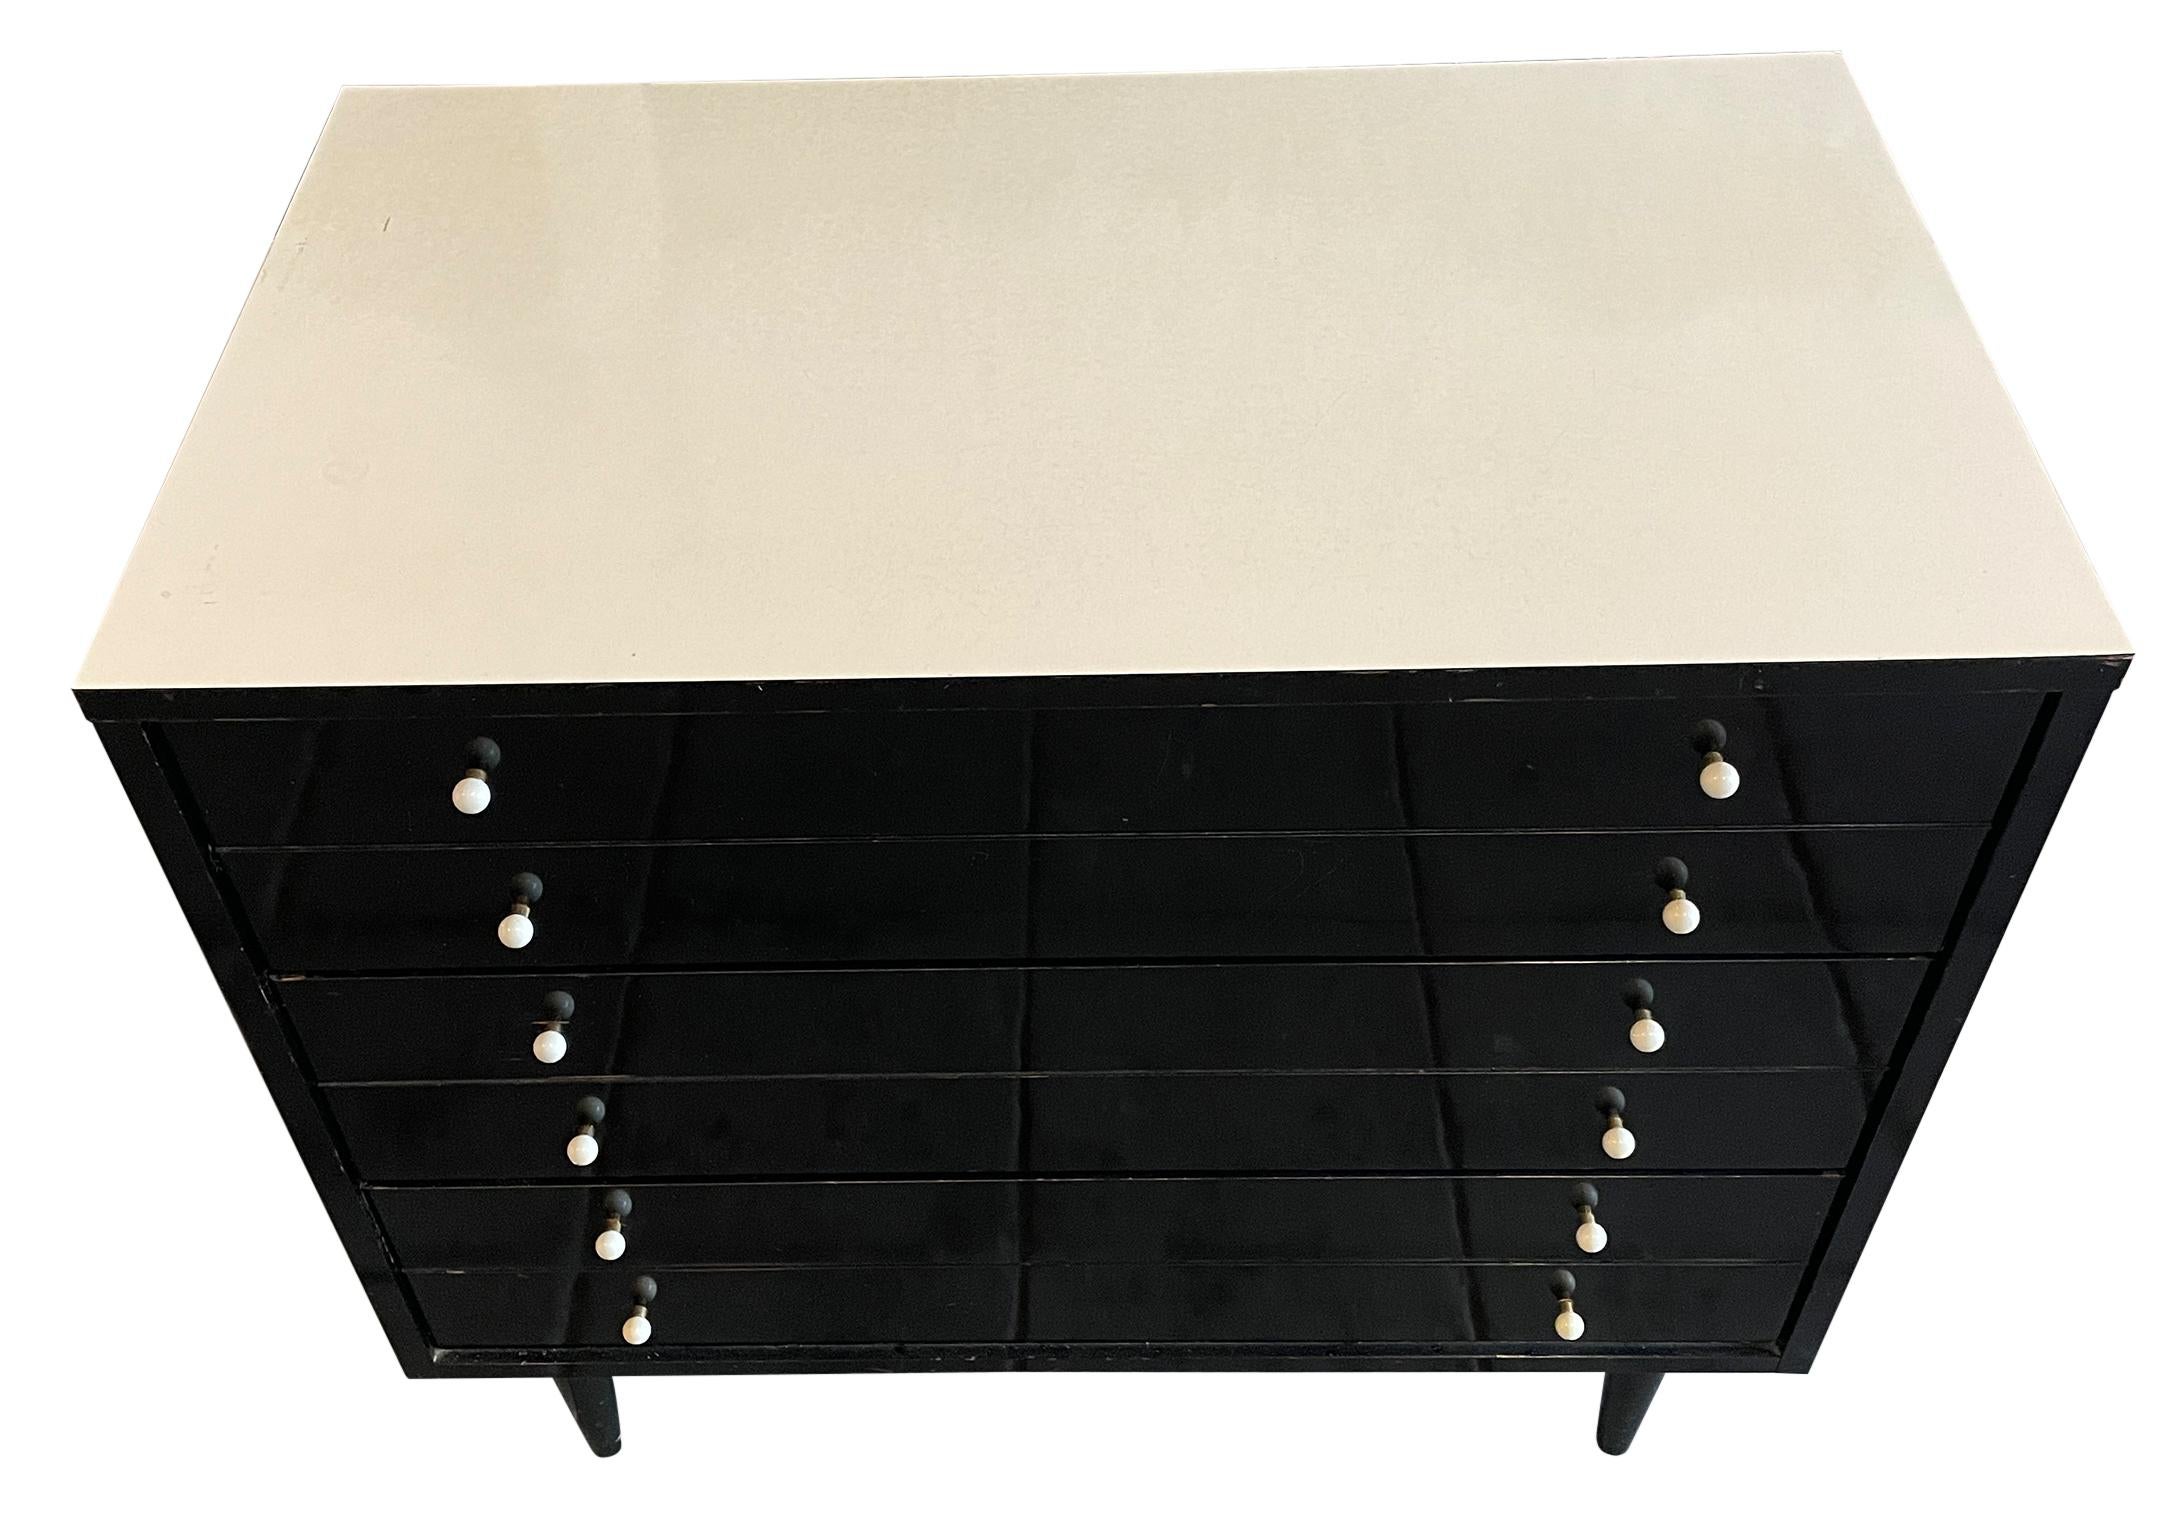 Mid-Century Modern American of Martinsville 3 drawer dresser black white. All original vintage condition - black lacquer shows wear - white glass and brass knobs. All drawers slide smooth and clean inside. Has white laminate top. Located in Brooklyn